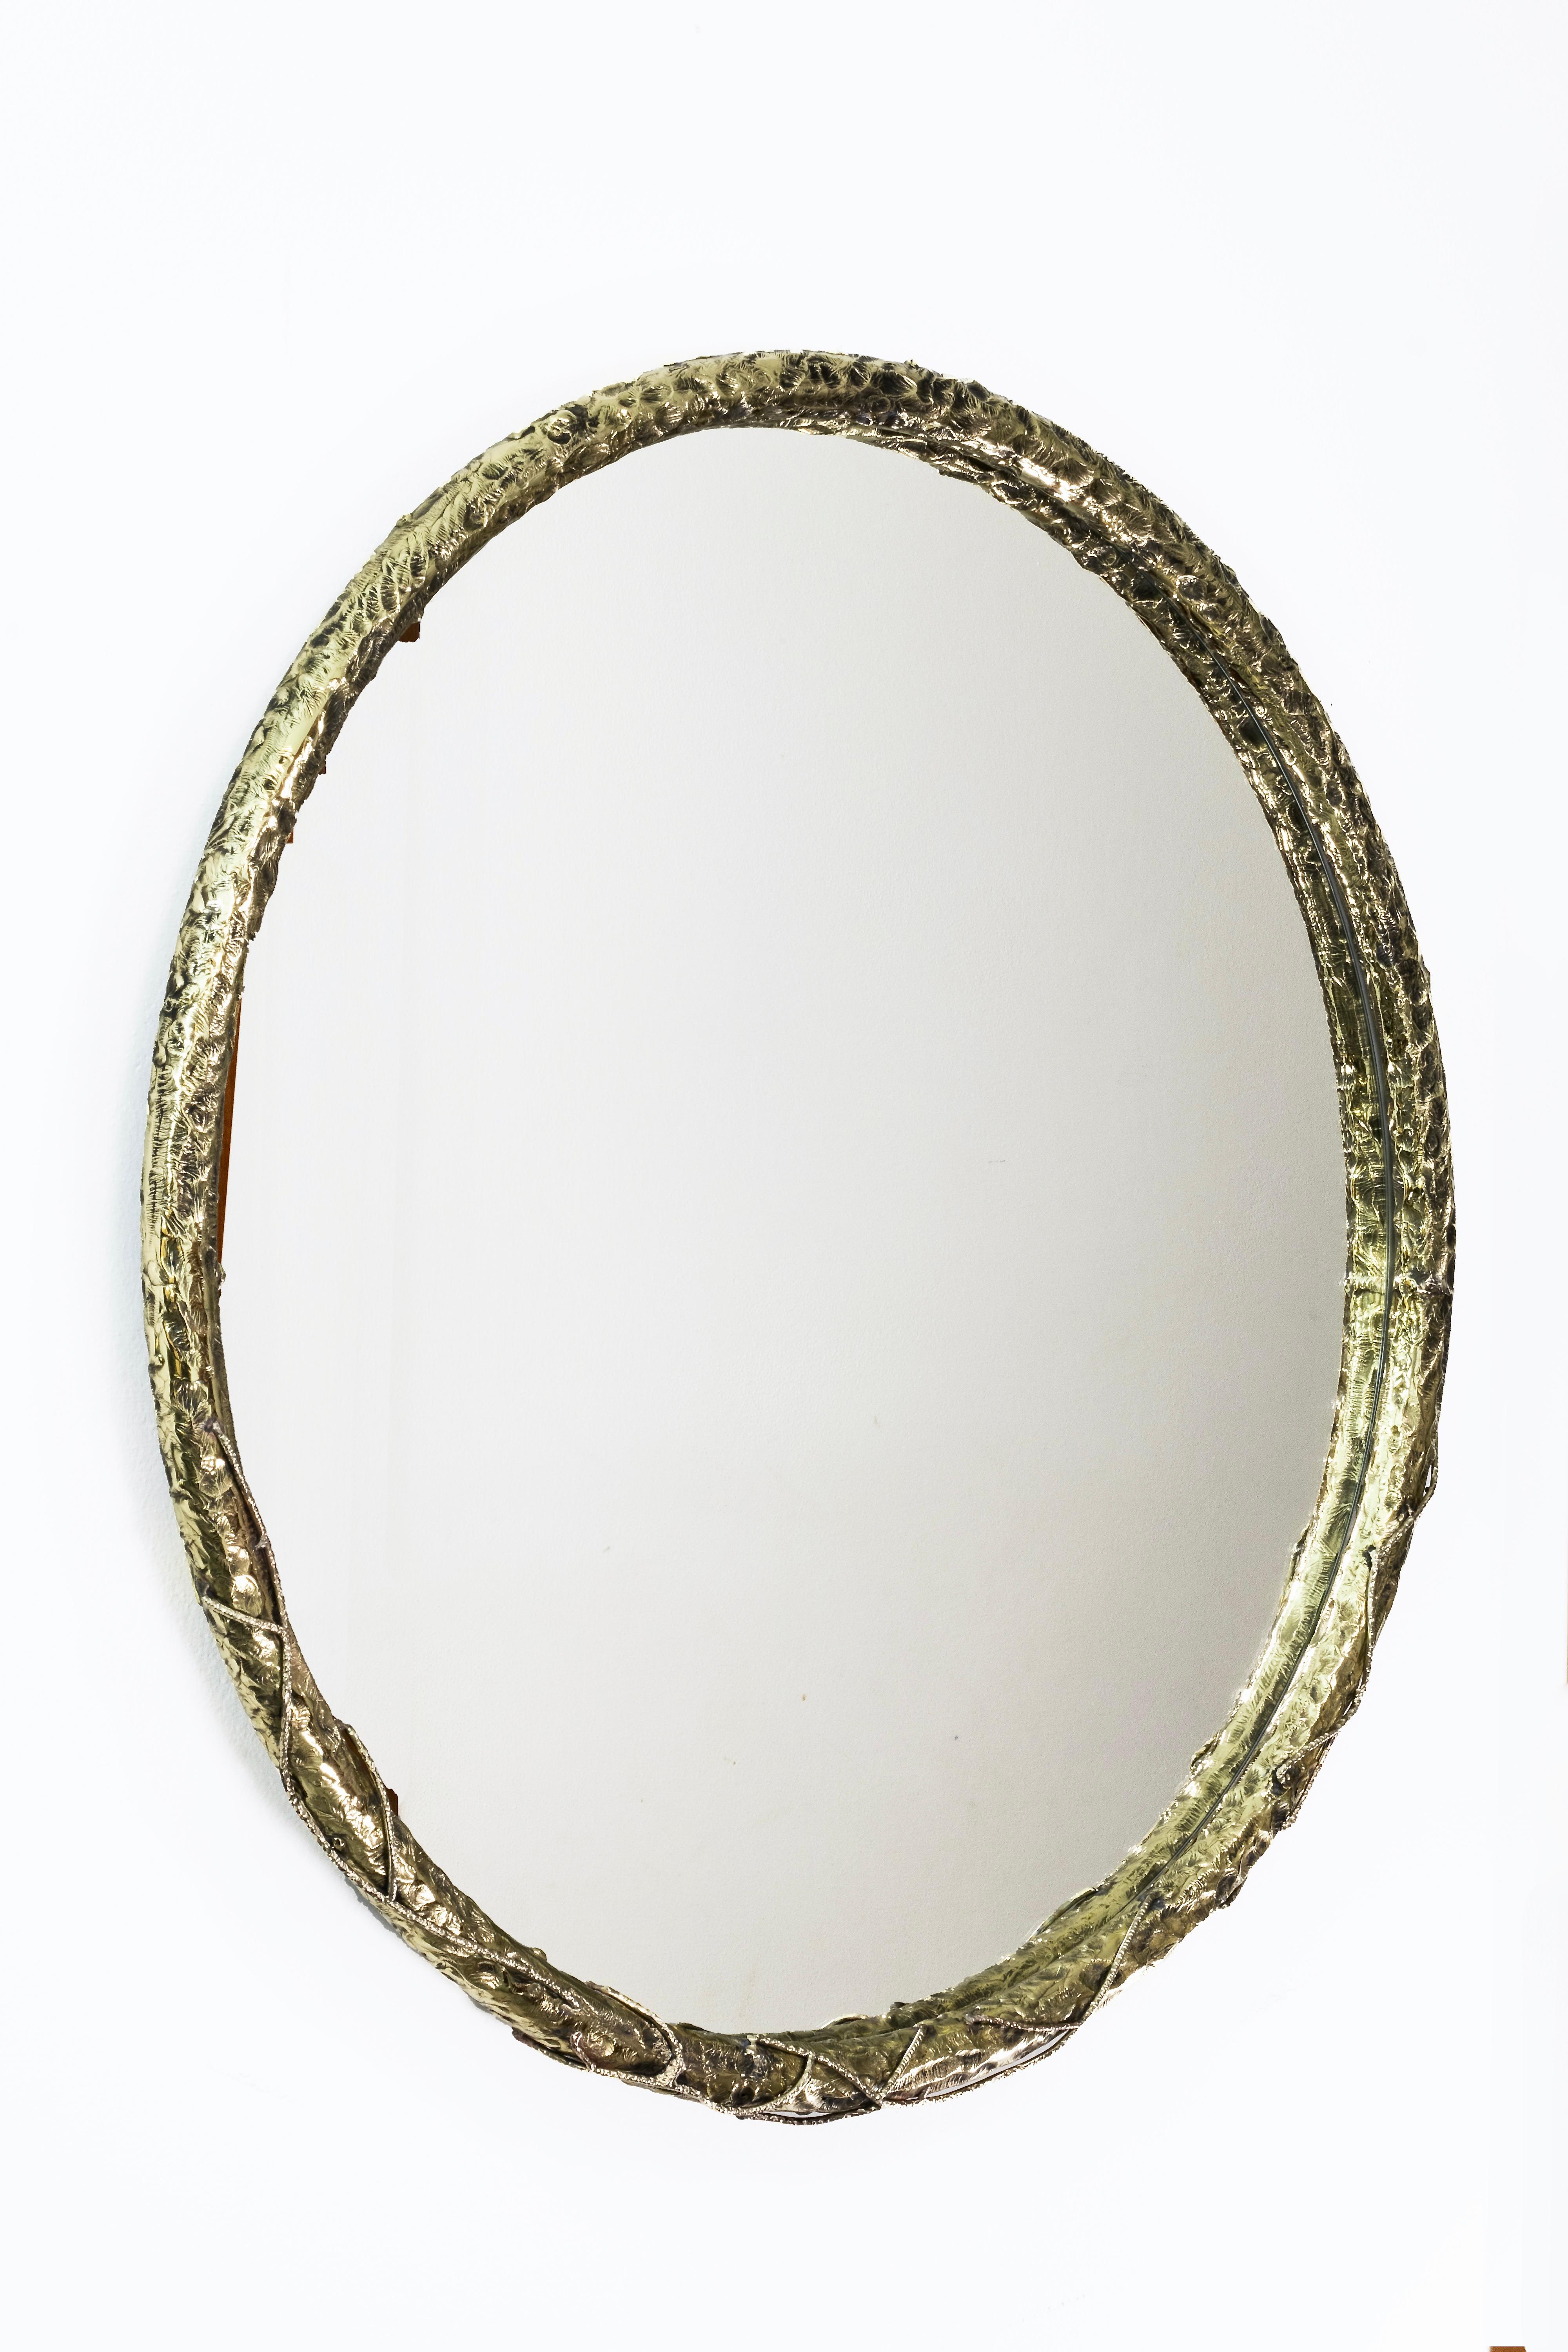 Eryn brass mirror by Samuel Costantini
Dimensions: D30 x H3 cm
Materials: brass, mirror

A circle branch wrapped in ivy.
Made entrely of brass and manually flame worked.

Samuel Constantini
The ability to create objects lies in the tradition